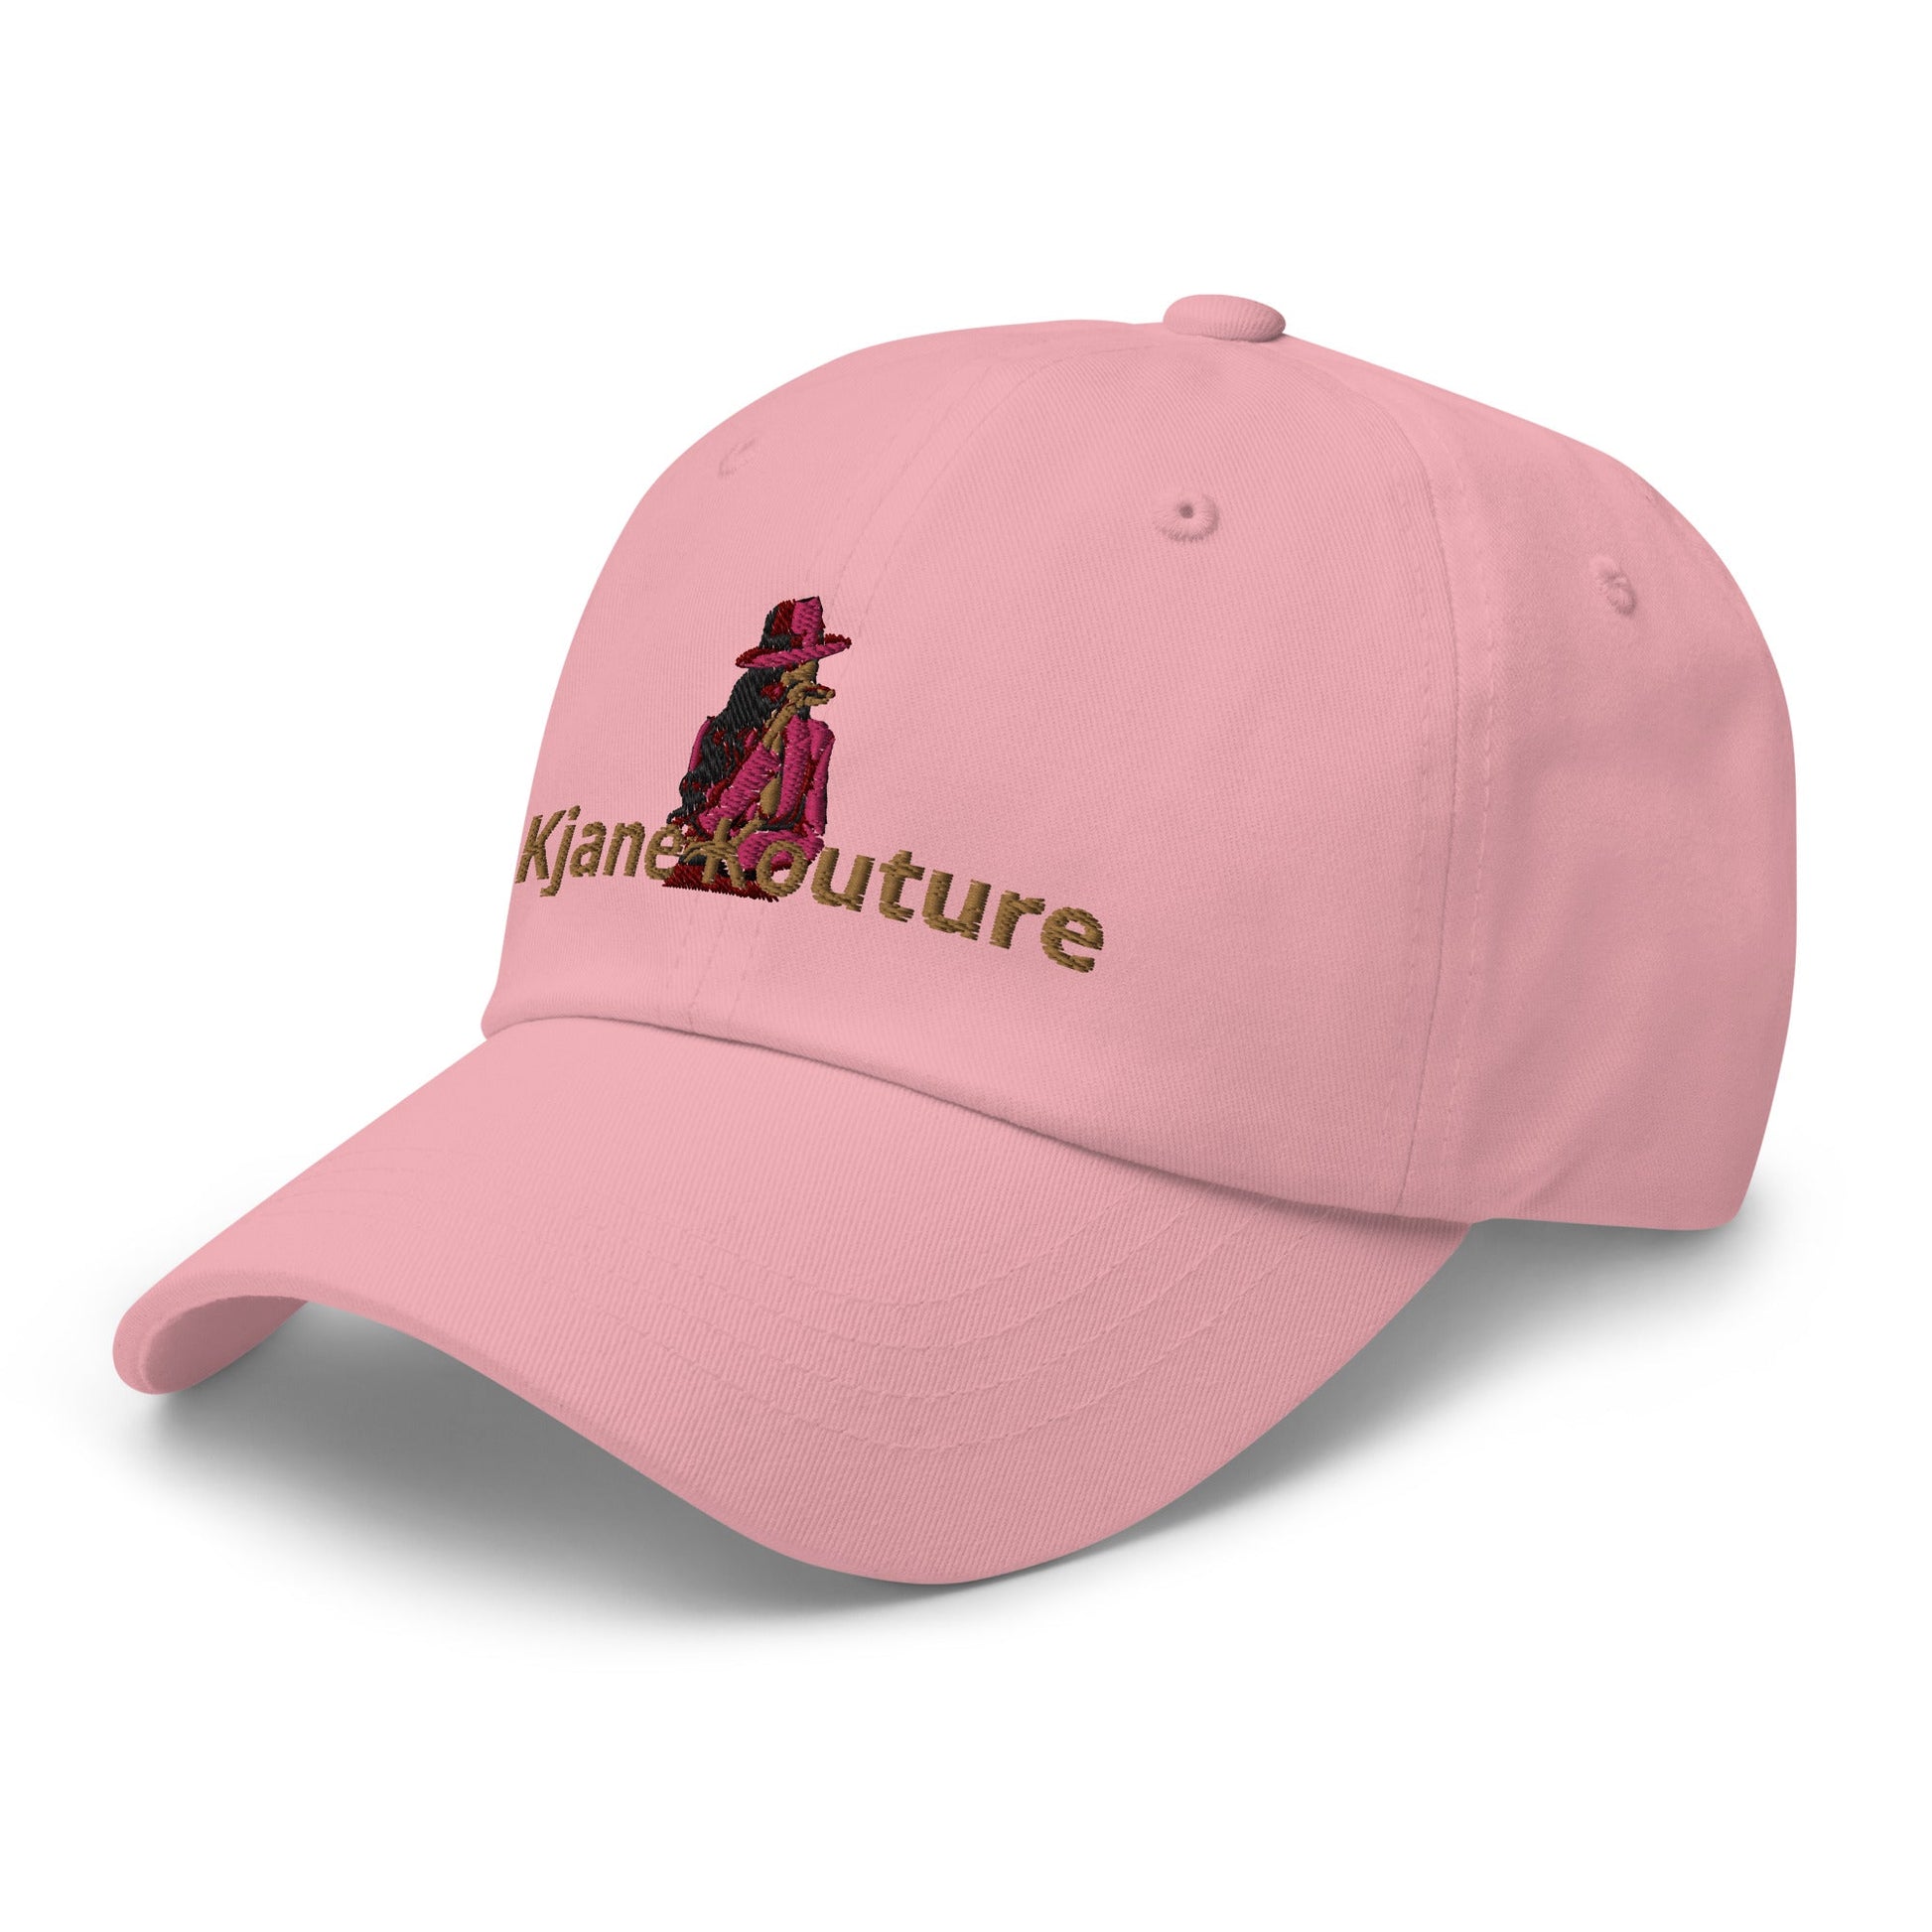 a pink baseball hat sitting on a white plate 